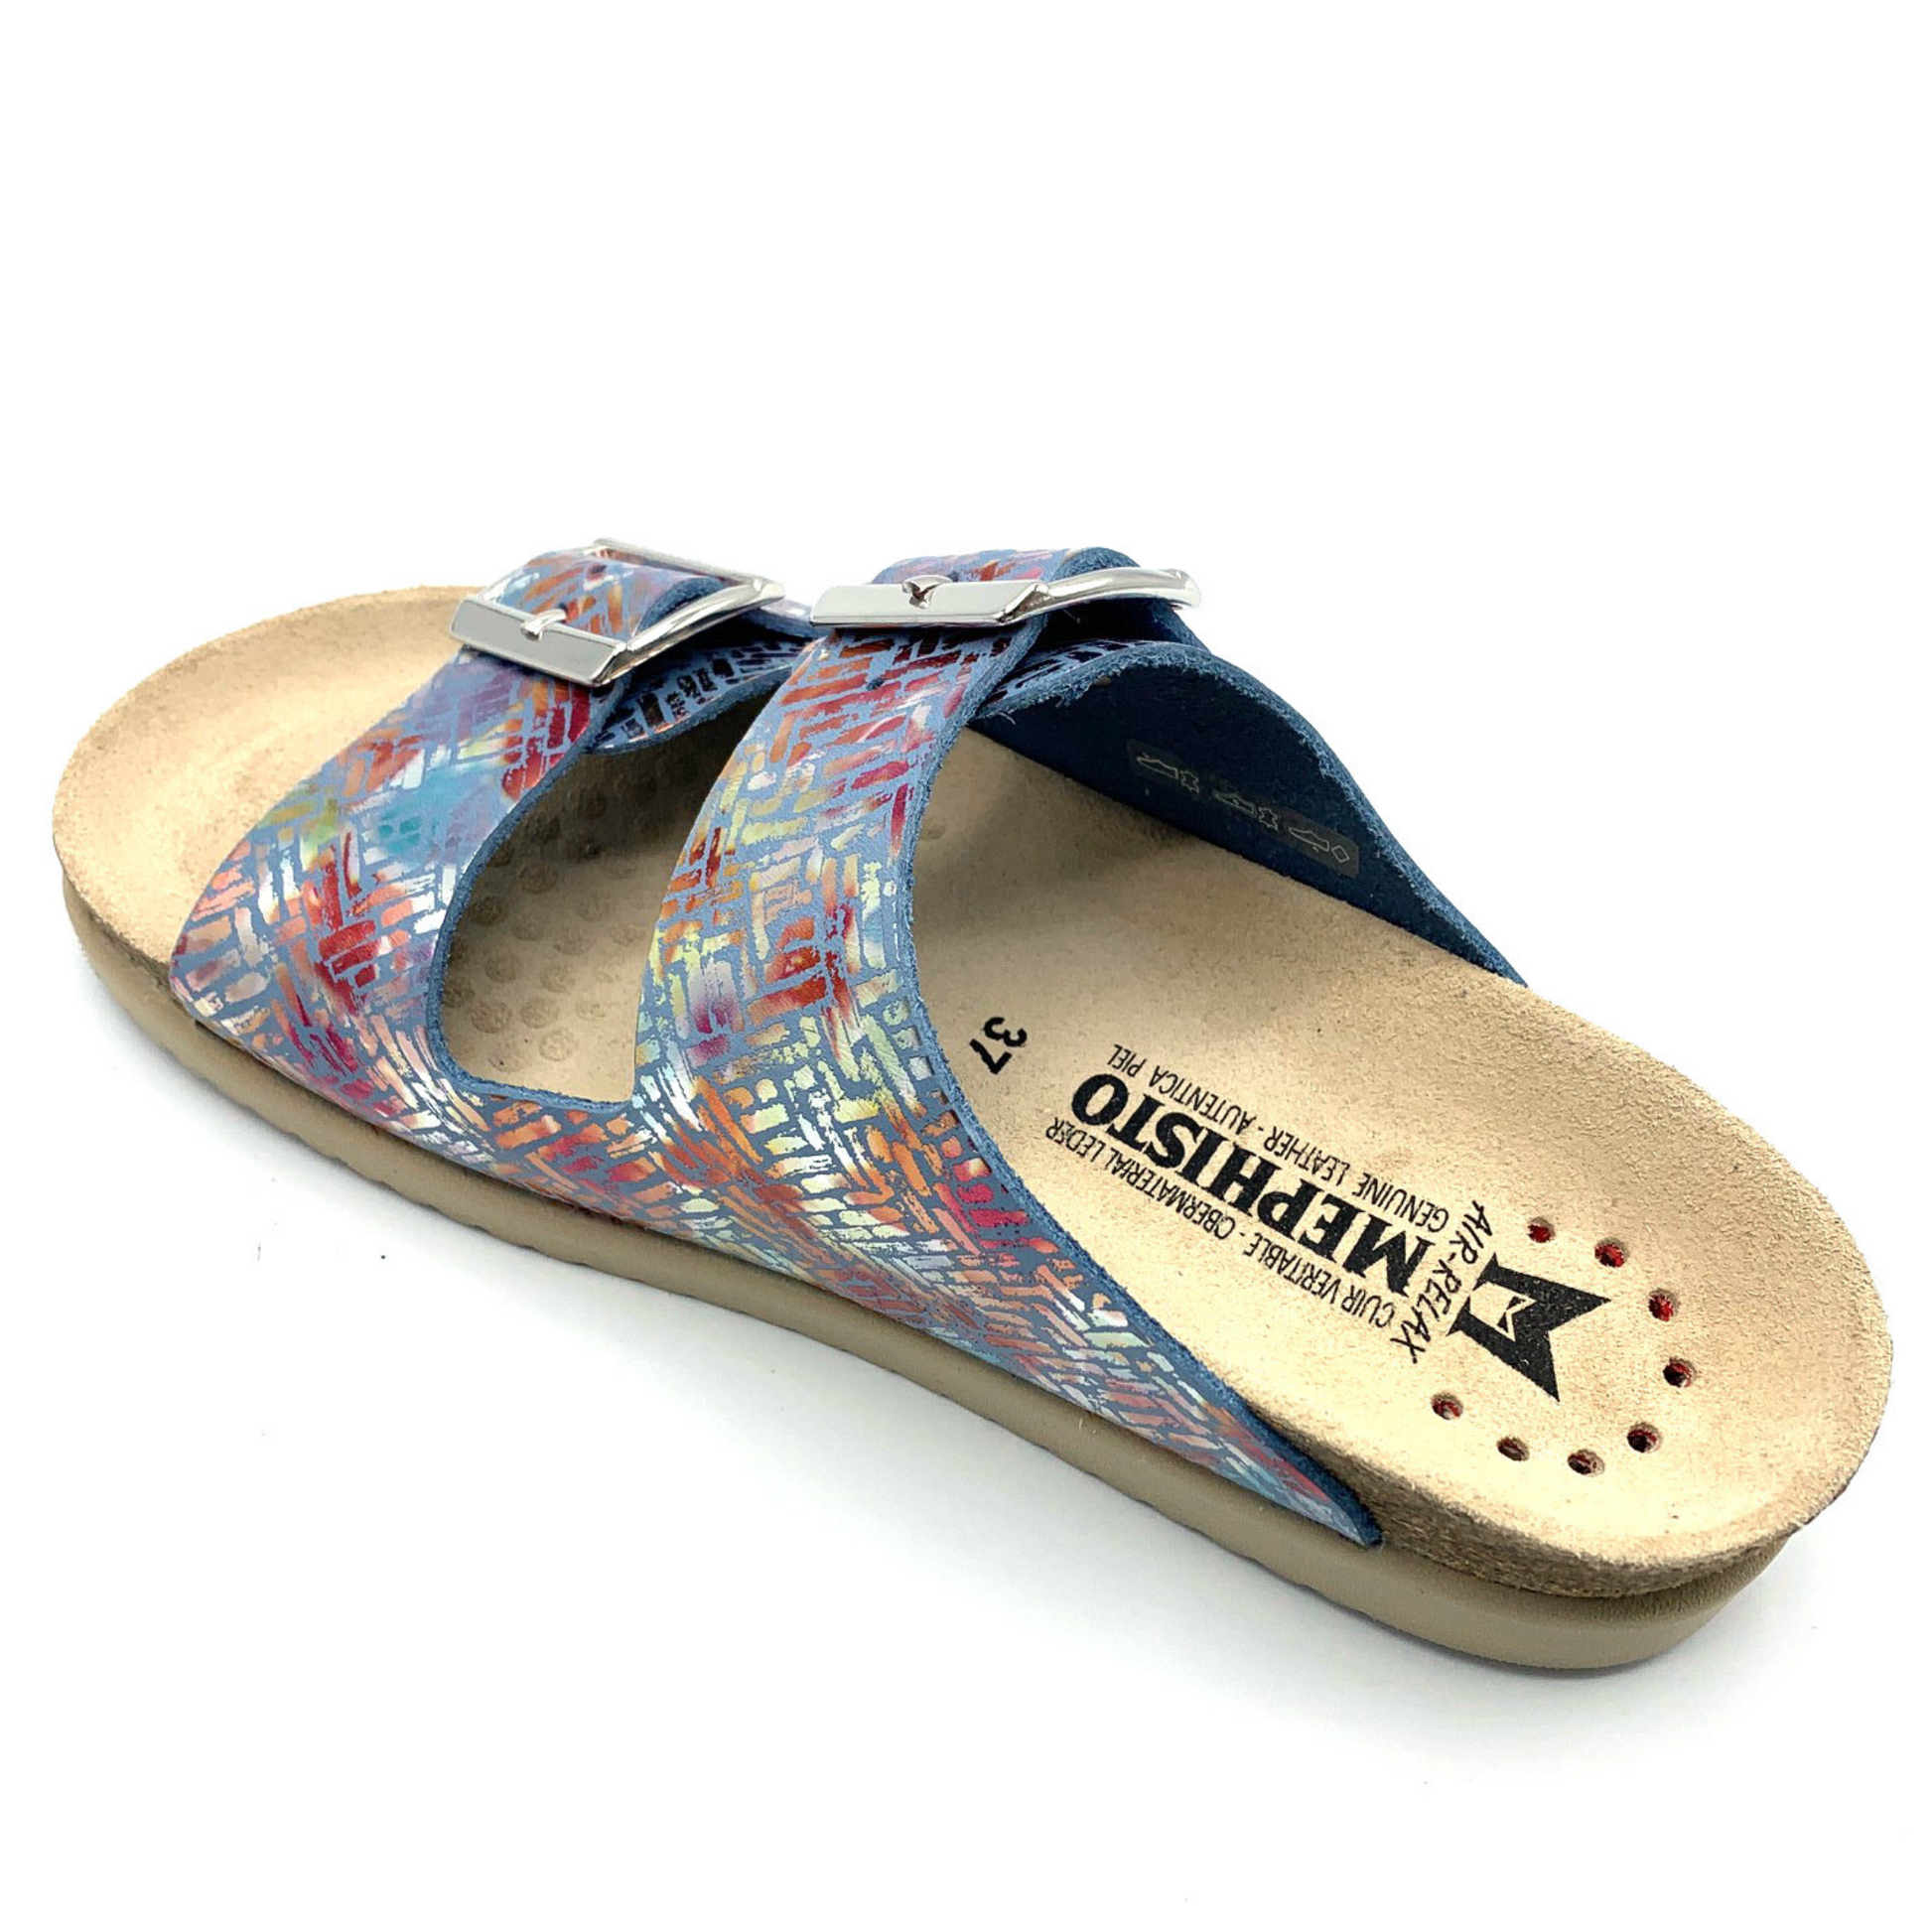 The hind, profile view of a multicoloured sandal with a beige footbed.